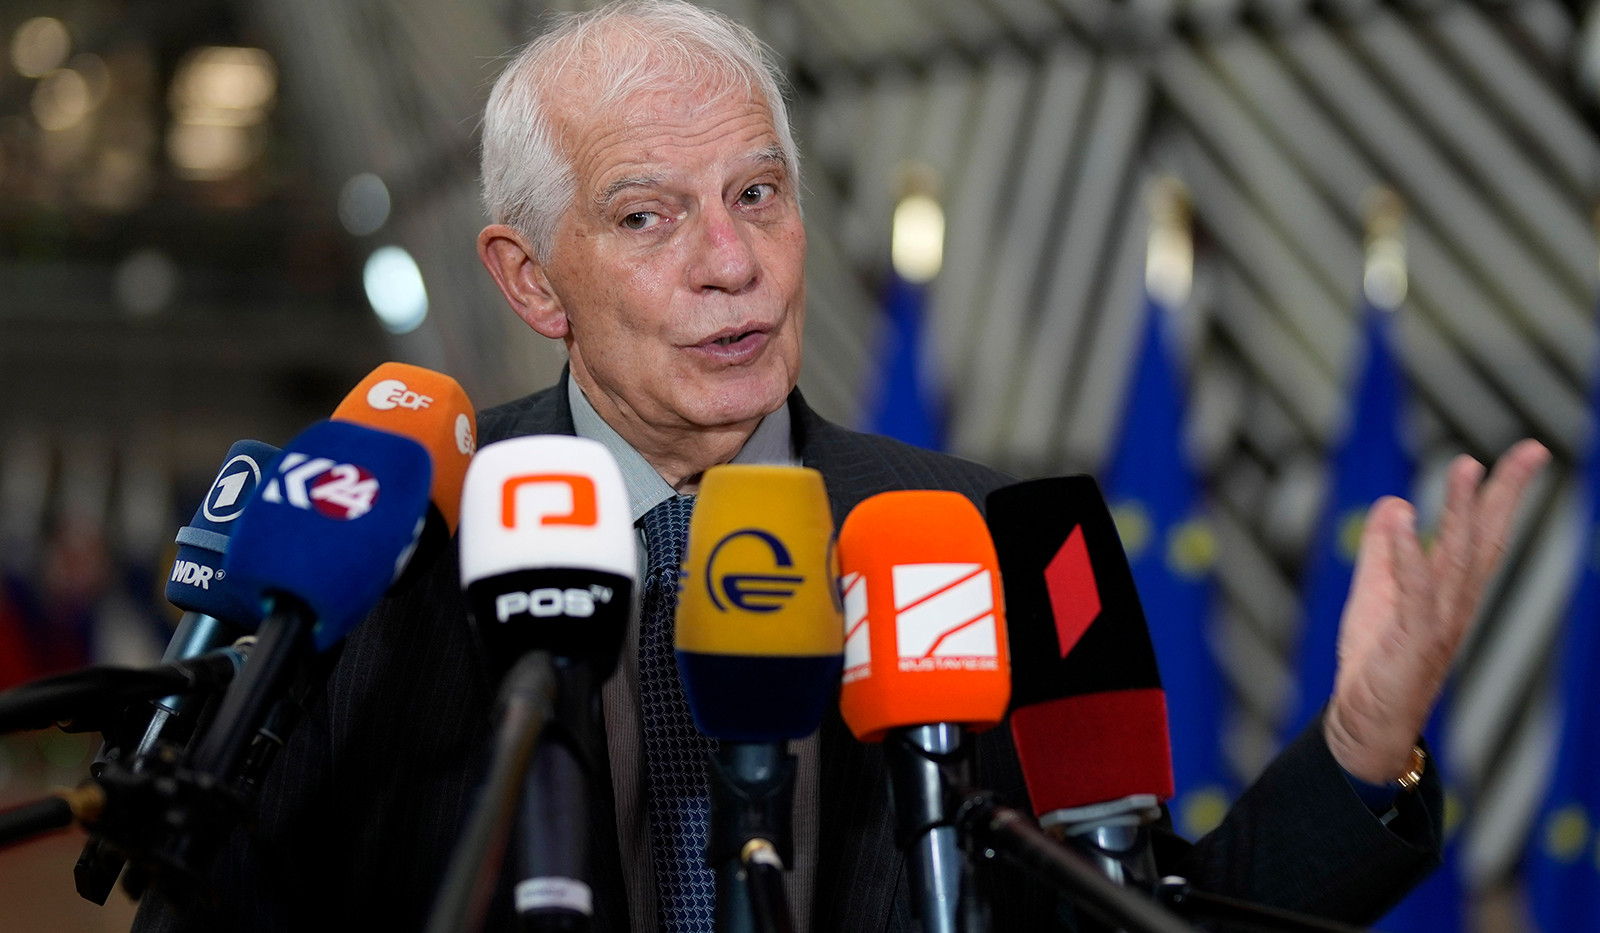 EU's Borrell: humanitarian situation in Gaza could not be worse